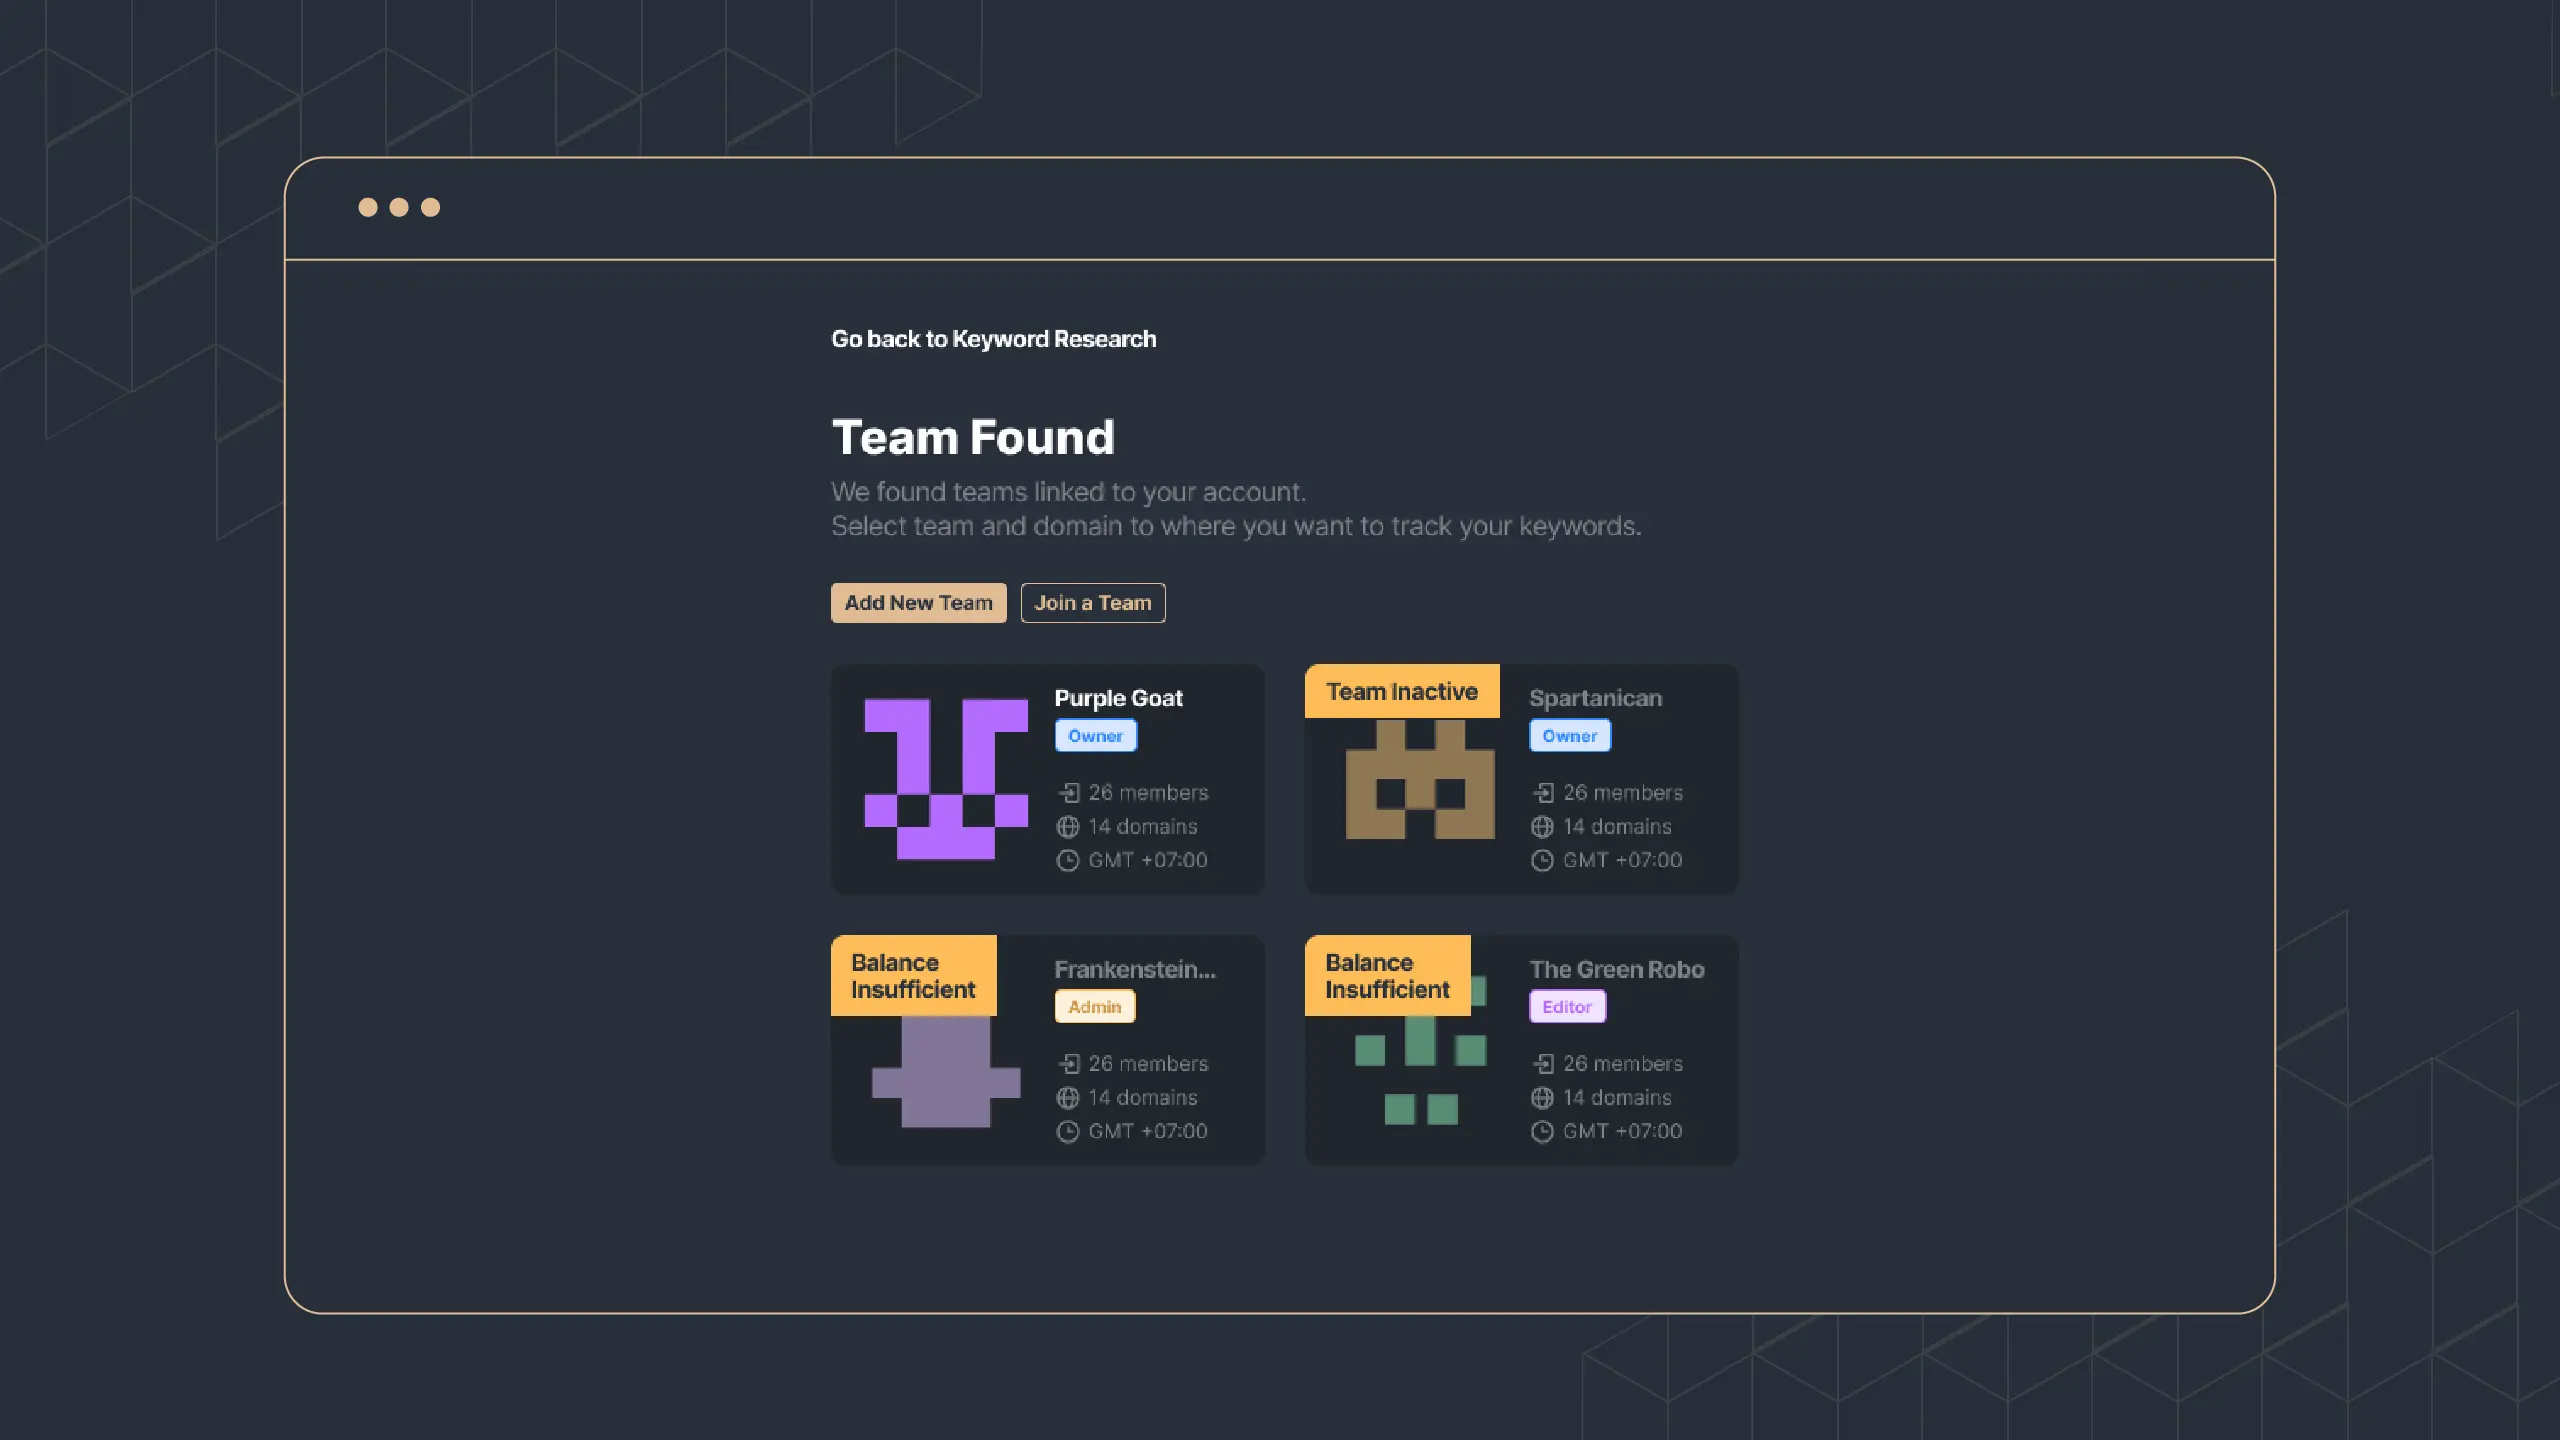 Picture 6: Team found in your account